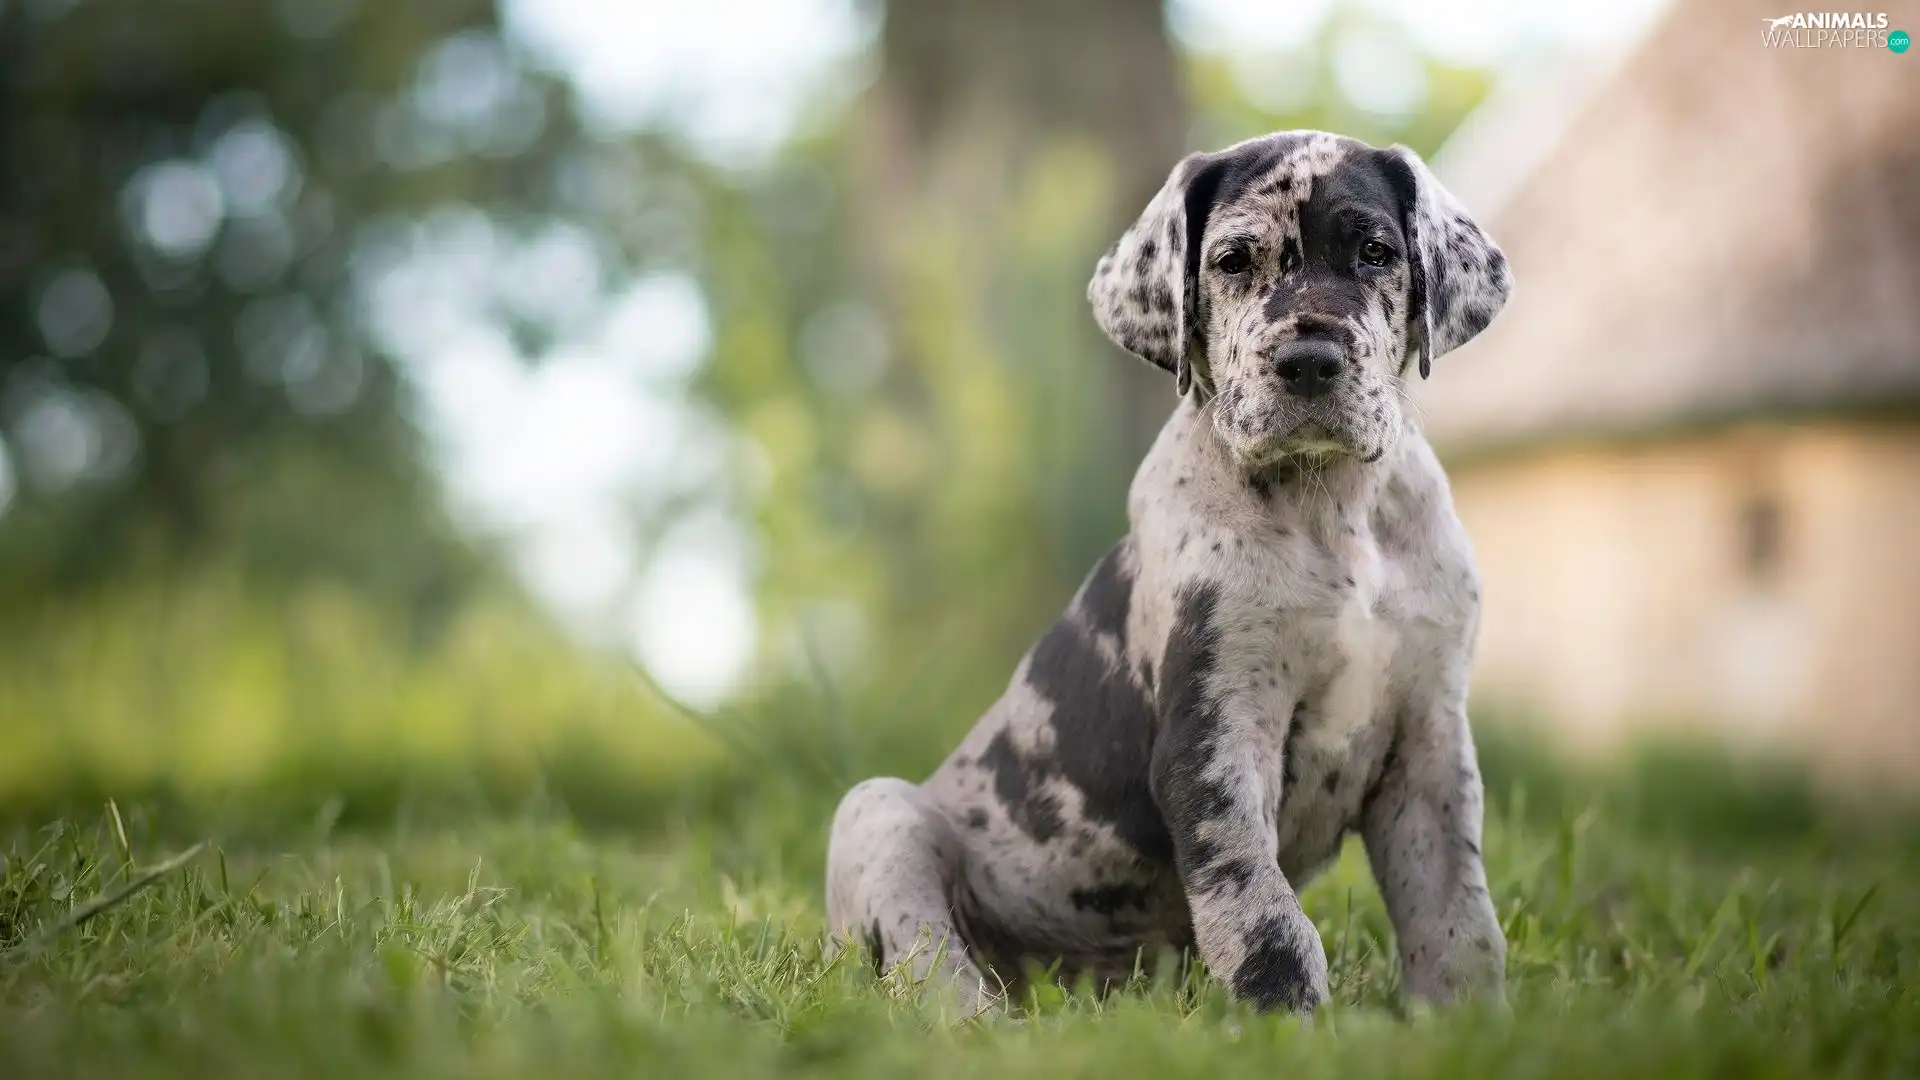 Patches, grass, Puppy, Catahoula Leopard Dog, dog